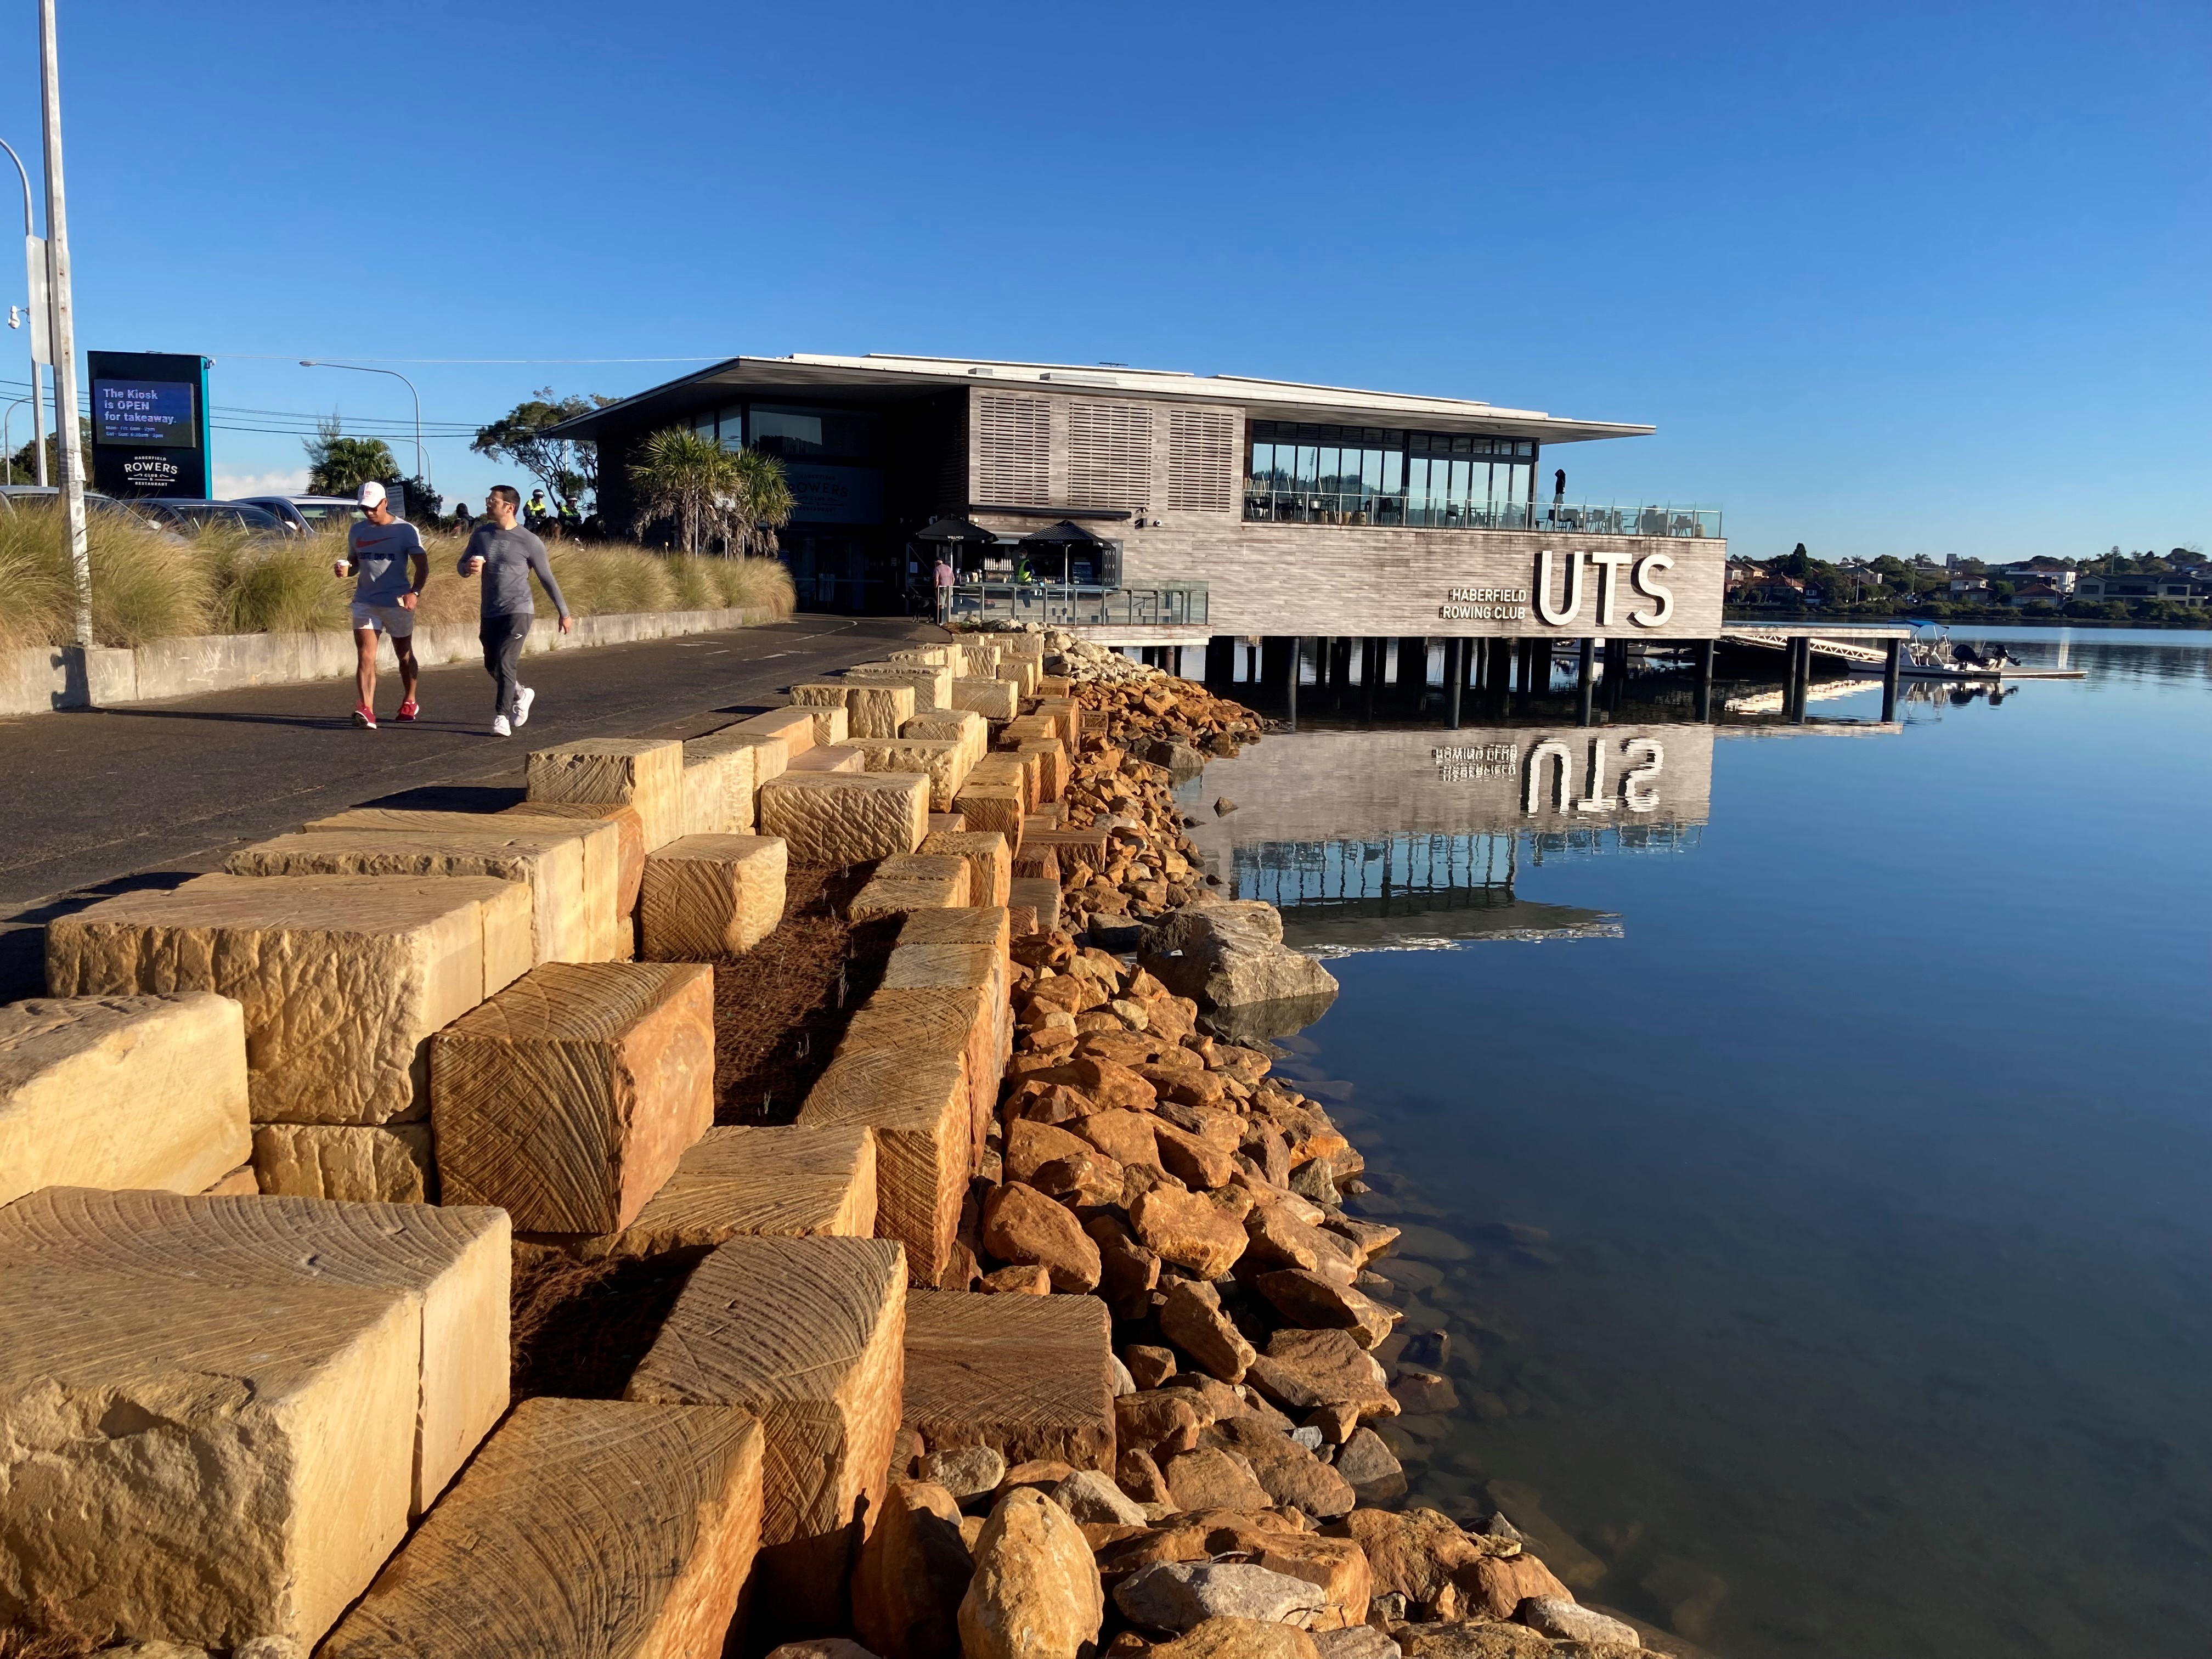 Dobroyd Point Seawall with new sandstone steps, with UTS Haberfield Rowing Club in the background